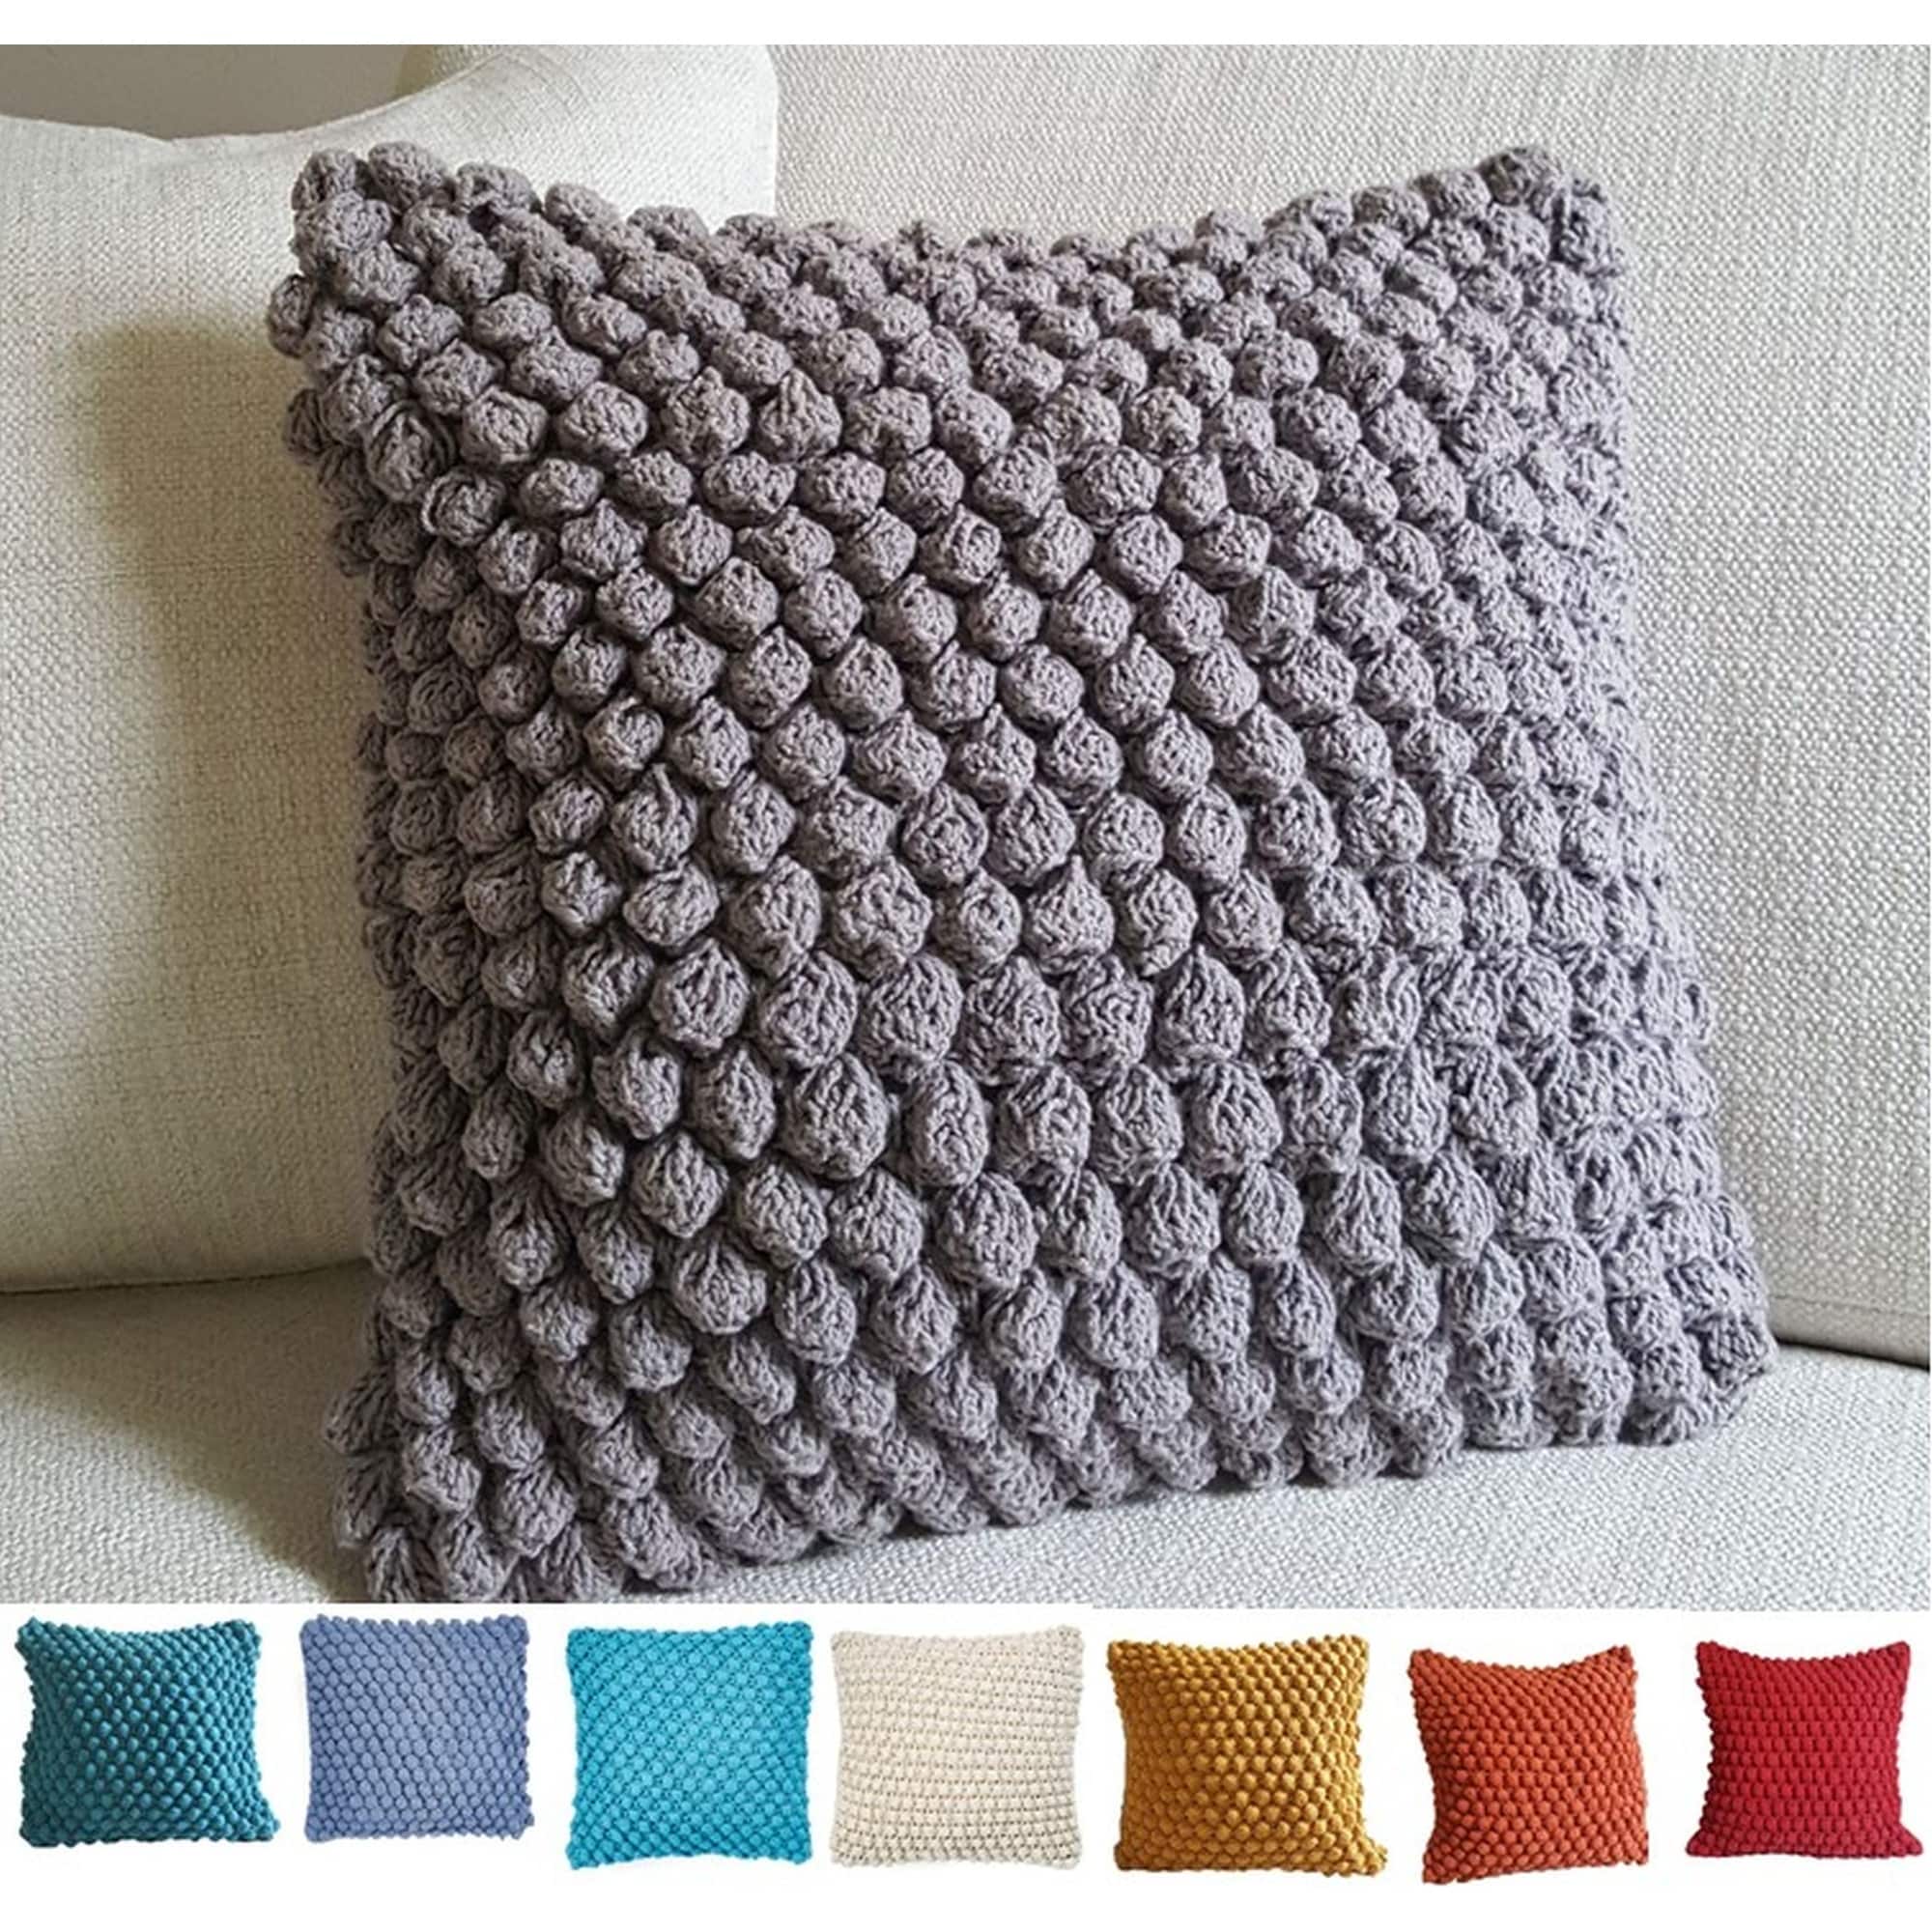 https://ak1.ostkcdn.com/images/products/is/images/direct/217cc2a07418d8ef4bb428984232c4548f8f9a76/Orbit-Ball-Cotton-18-Inch-Decorative-Throw-Pillow.jpg